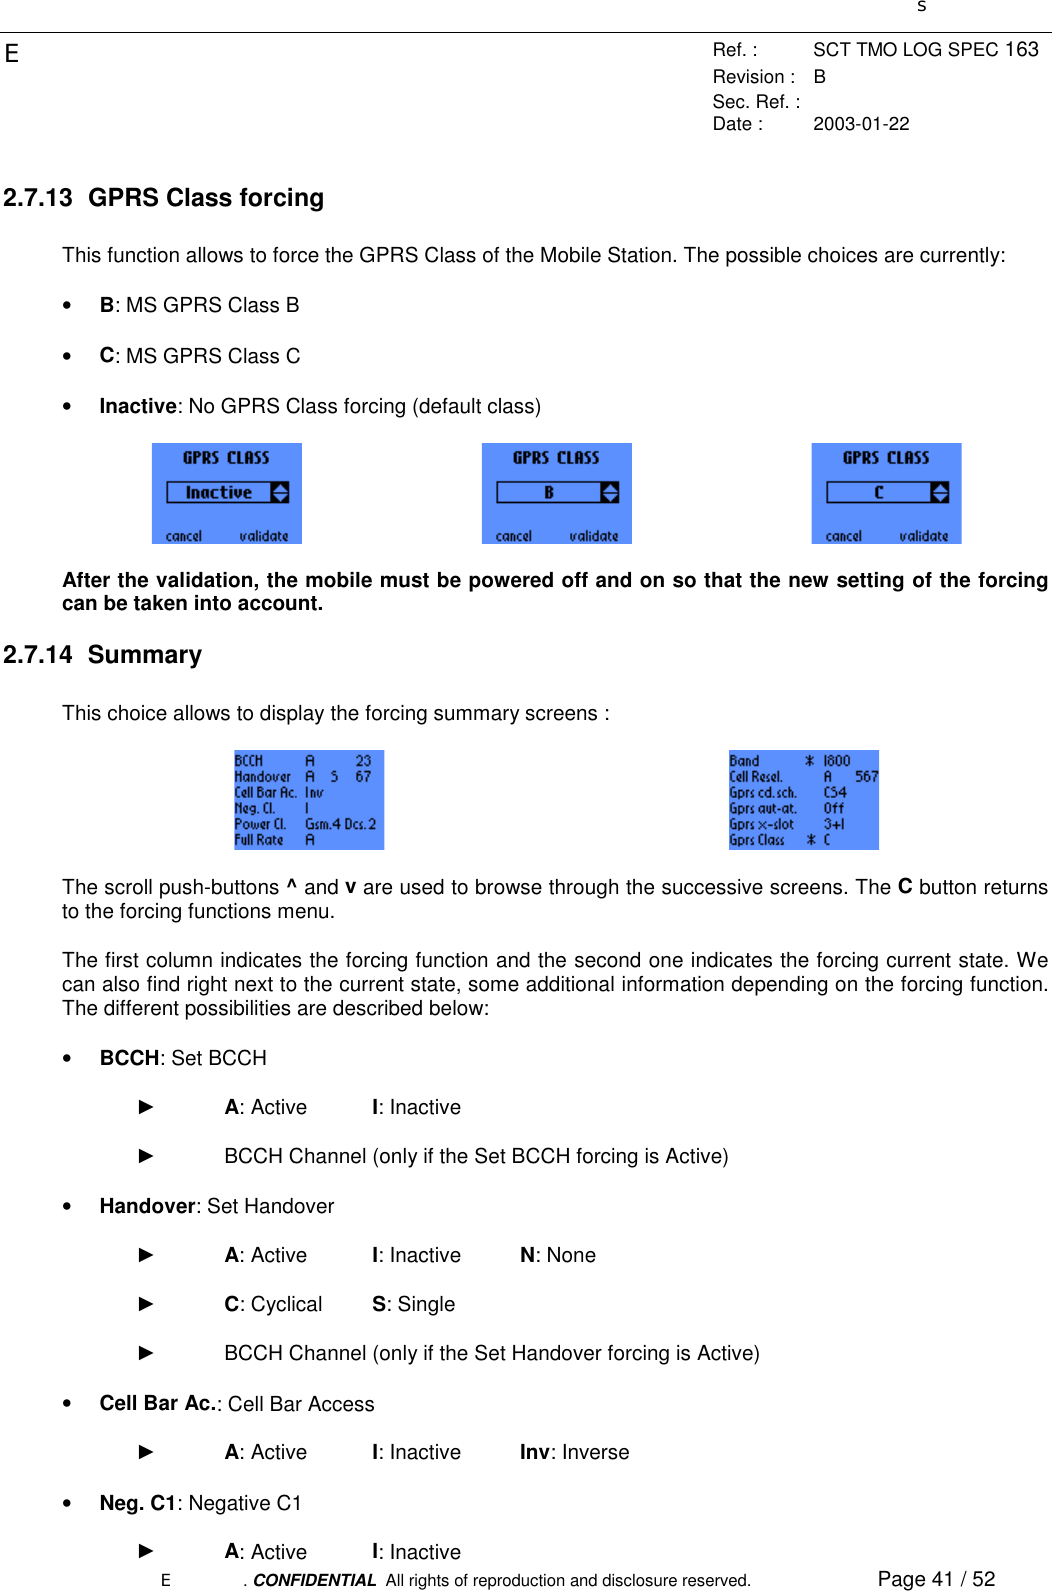 sERef. : SCT TMO LOG SPEC 163Revision : BSec. Ref. :Date : 2003-01-22E. CONFIDENTIAL  All rights of reproduction and disclosure reserved. Page 41 / 522.7.13  GPRS Class forcingThis function allows to force the GPRS Class of the Mobile Station. The possible choices are currently:• B: MS GPRS Class B• C: MS GPRS Class C• Inactive: No GPRS Class forcing (default class)After the validation, the mobile must be powered off and on so that the new setting of the forcingcan be taken into account.2.7.14 SummaryThis choice allows to display the forcing summary screens :The scroll push-buttons ^ and v are used to browse through the successive screens. The C button returnsto the forcing functions menu.The first column indicates the forcing function and the second one indicates the forcing current state. Wecan also find right next to the current state, some additional information depending on the forcing function.The different possibilities are described below:• BCCH: Set BCCH► A: Active I: Inactive►  BCCH Channel (only if the Set BCCH forcing is Active)• Handover: Set Handover► A: Active I: Inactive N: None► C: Cyclical S: Single►  BCCH Channel (only if the Set Handover forcing is Active)• Cell Bar Ac.: Cell Bar Access► A: Active I: Inactive Inv: Inverse• Neg. C1: Negative C1► A: Active I: Inactive